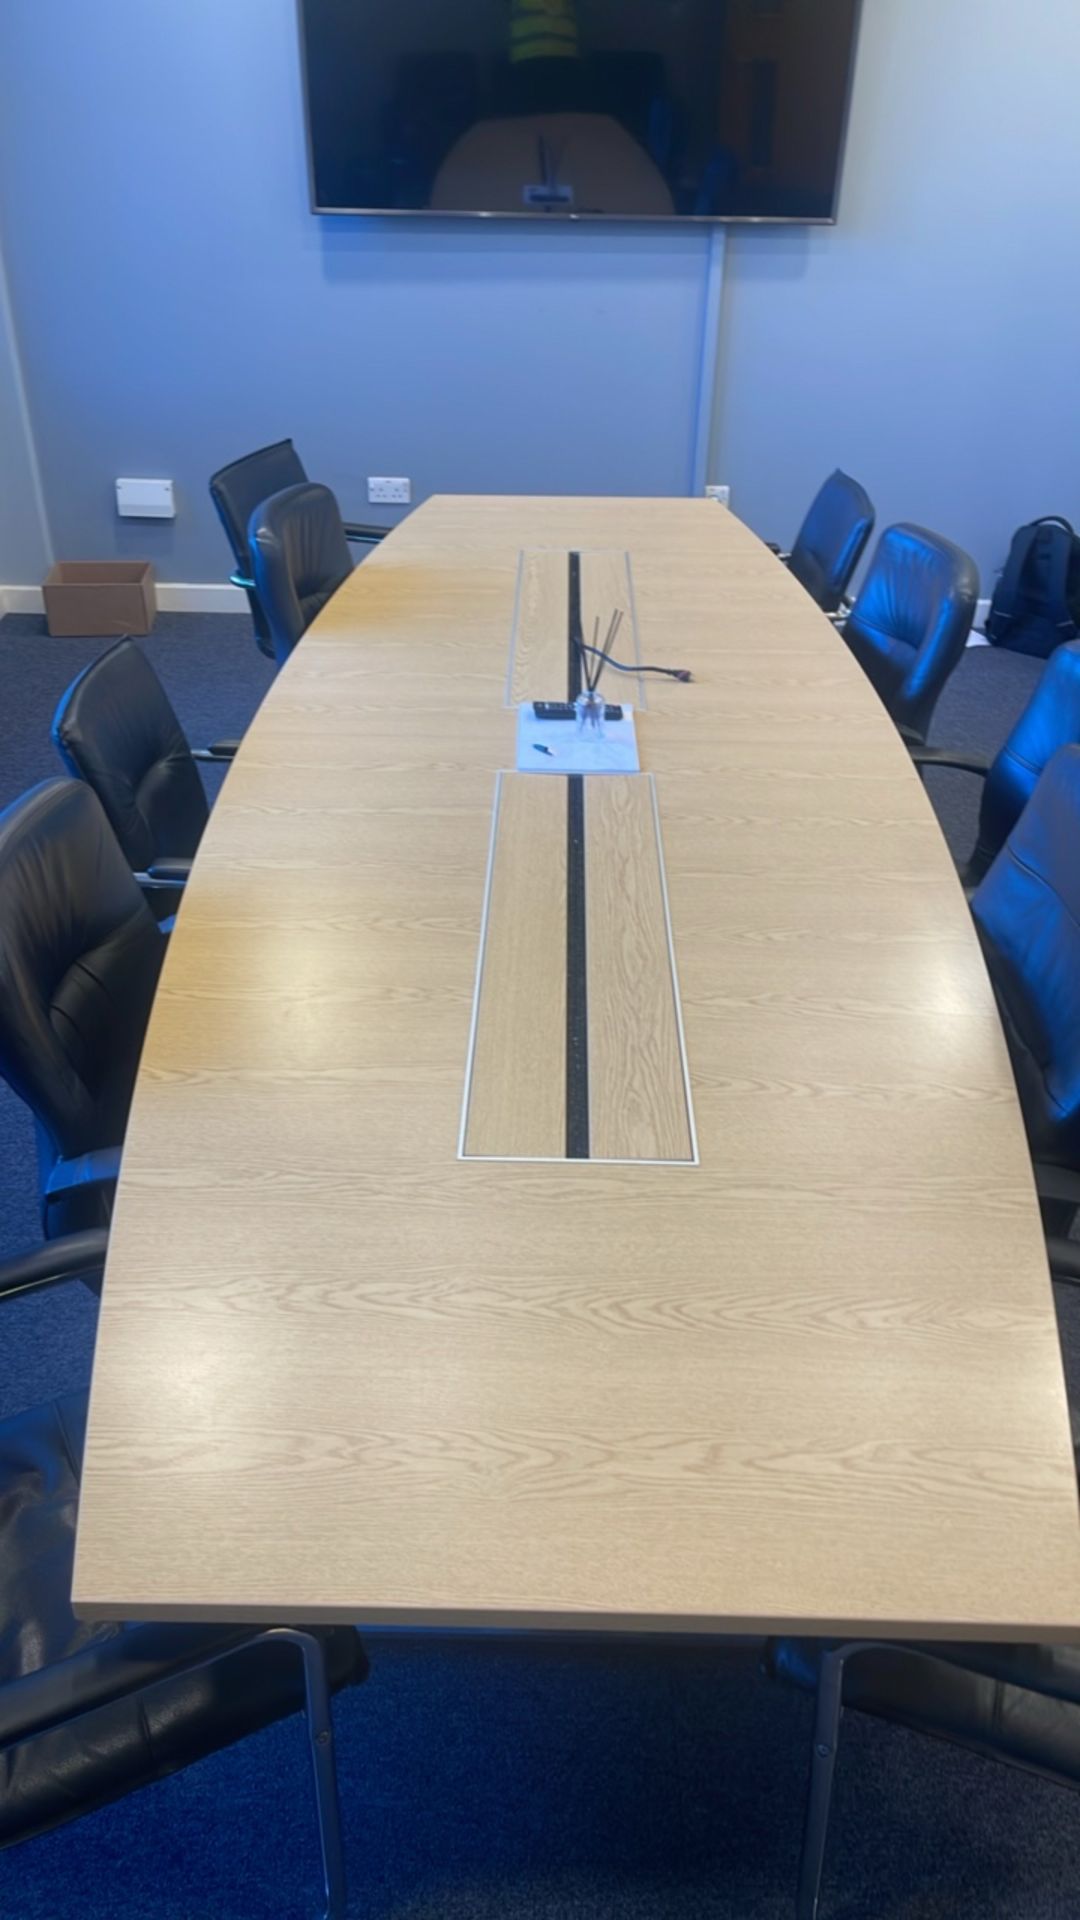 Conference Room Table & Chairs - Image 2 of 14